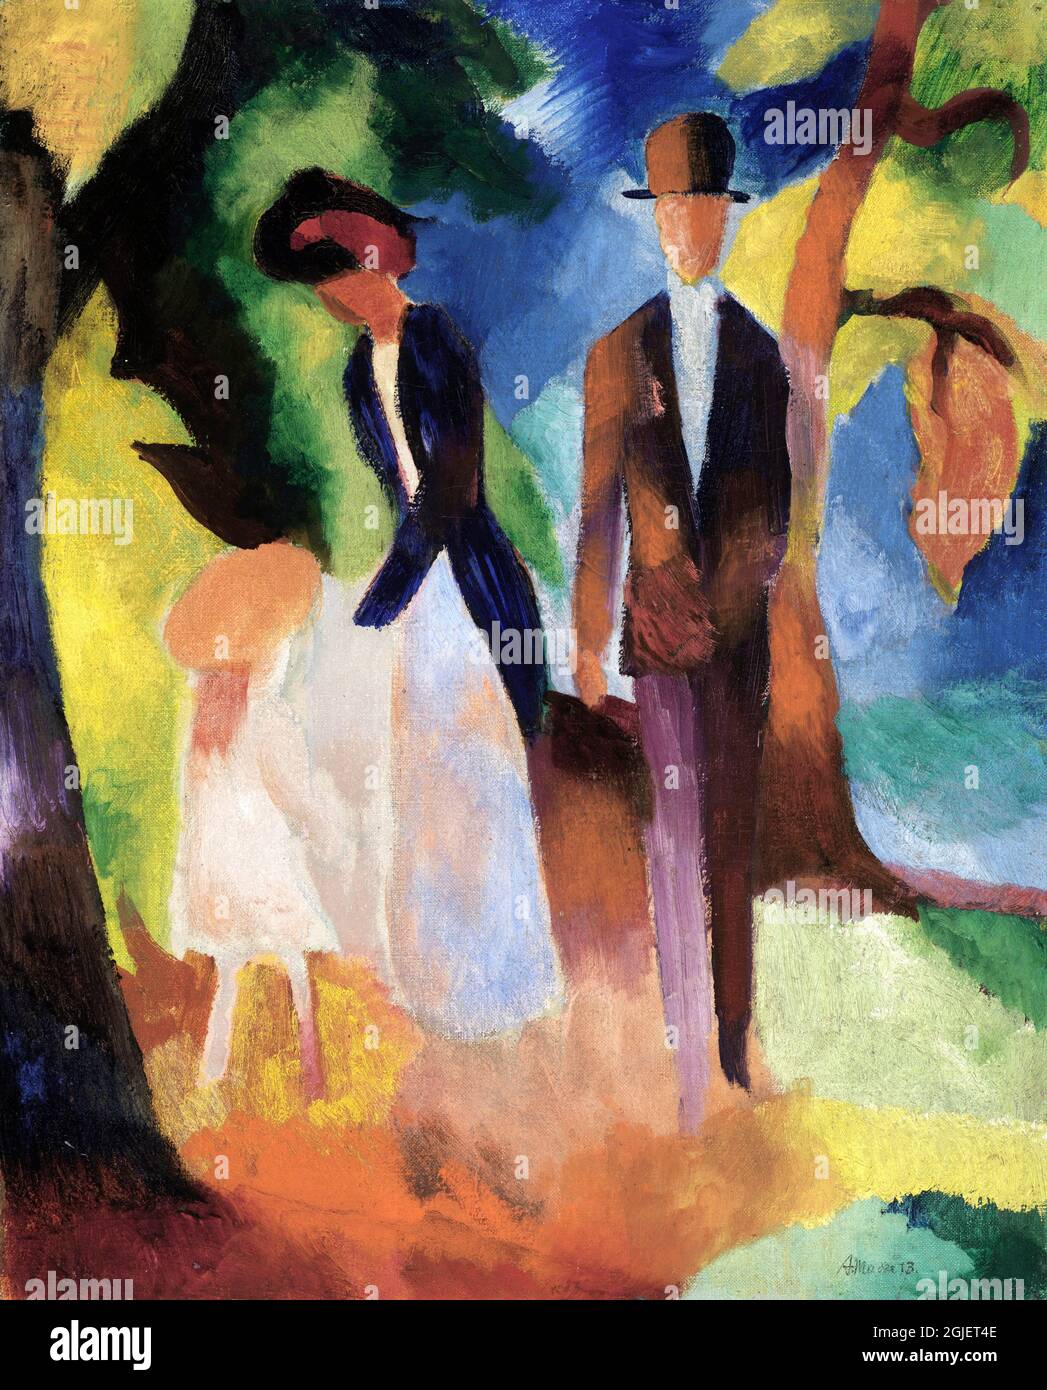 People by the Blue Lake by the German Expressionist Painter, August Macke (1887-1914), olio su tela, 1913 Foto Stock